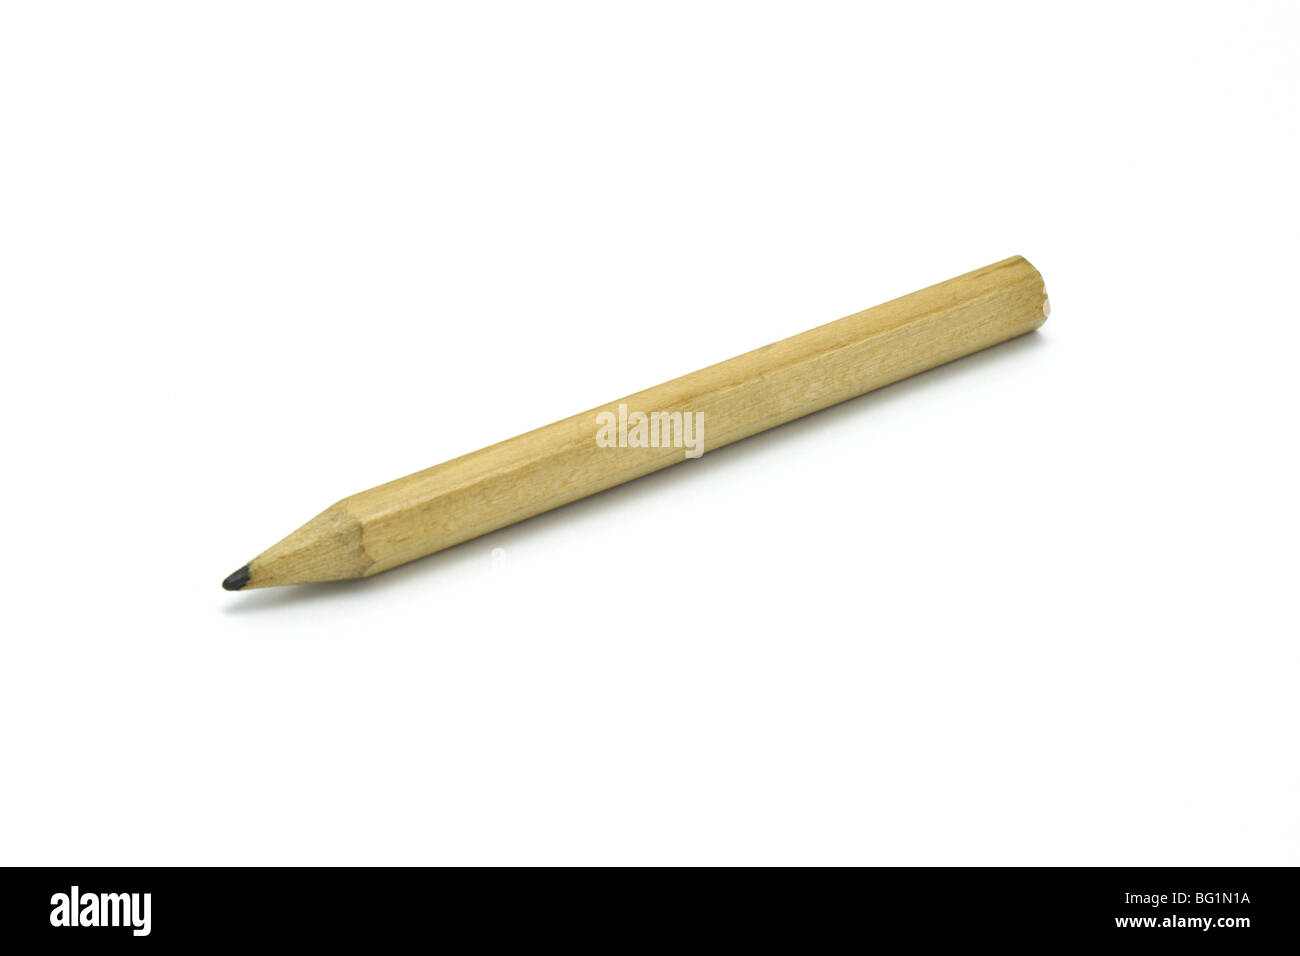 Short Pencil High Resolution Stock Photography and Images - Alamy